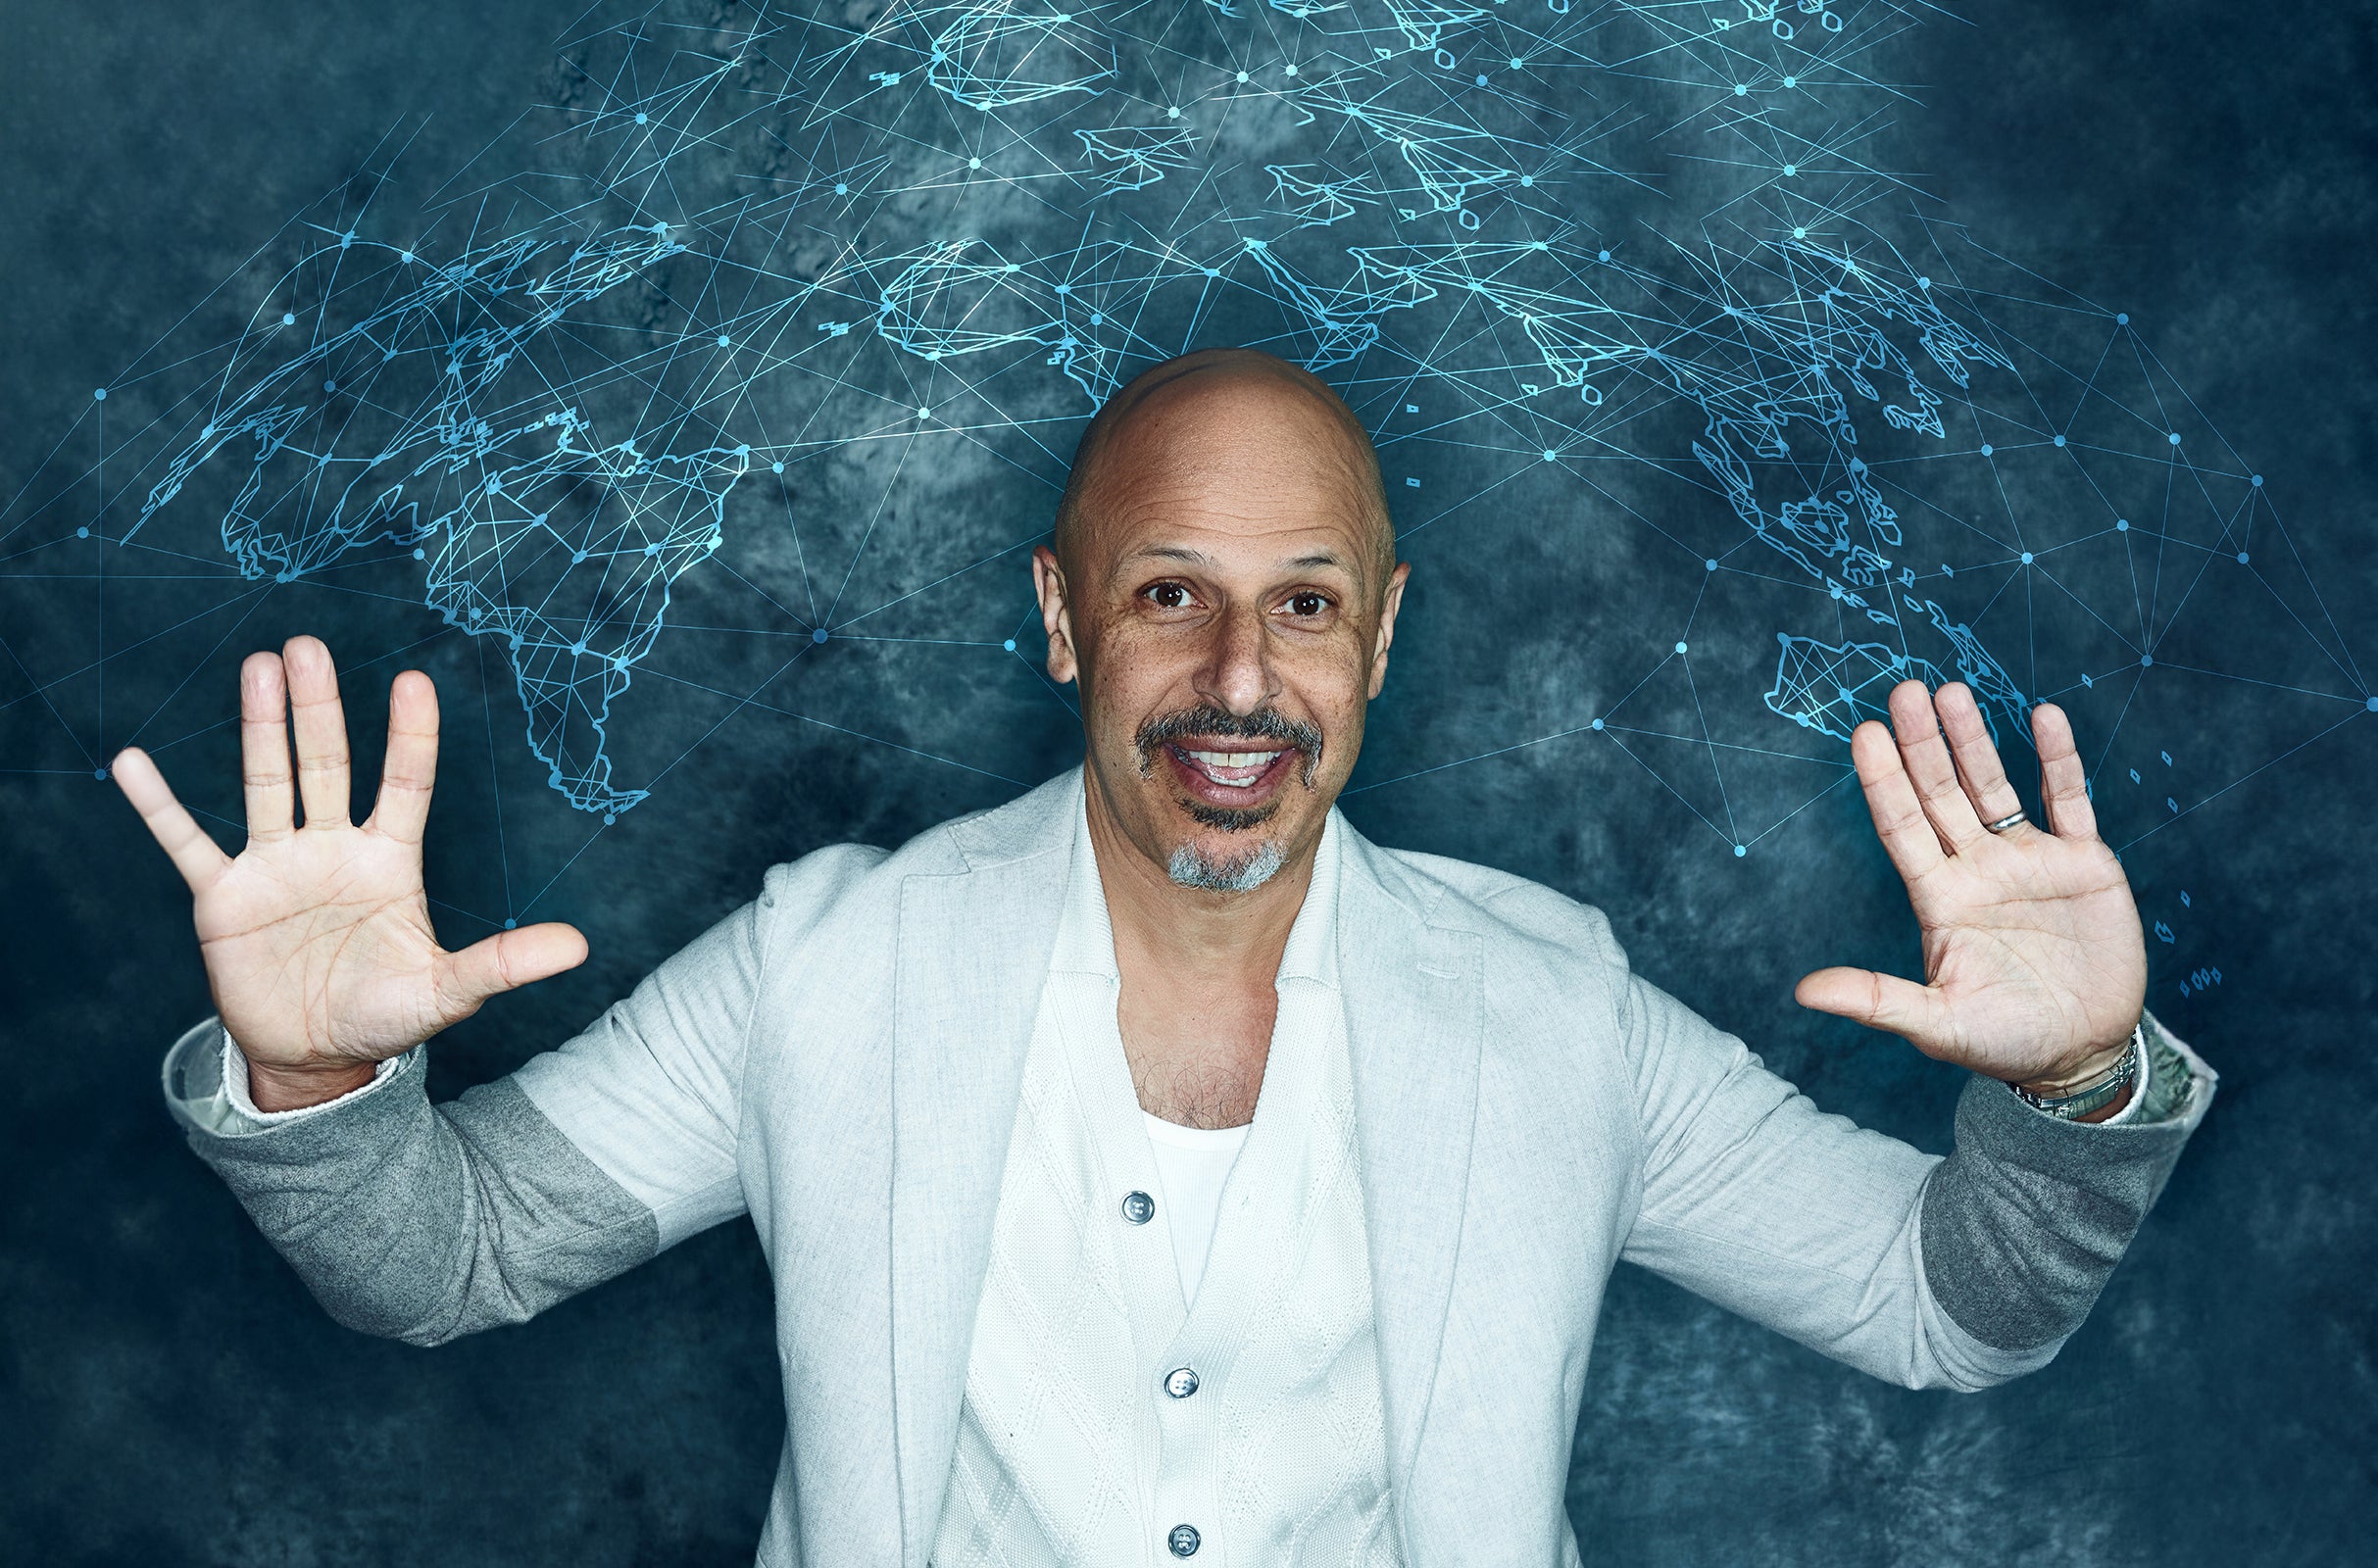 Maz Jobrani presale password for show tickets in Skokie, IL (Center Theatre at North Shore Center for the Performing Arts)